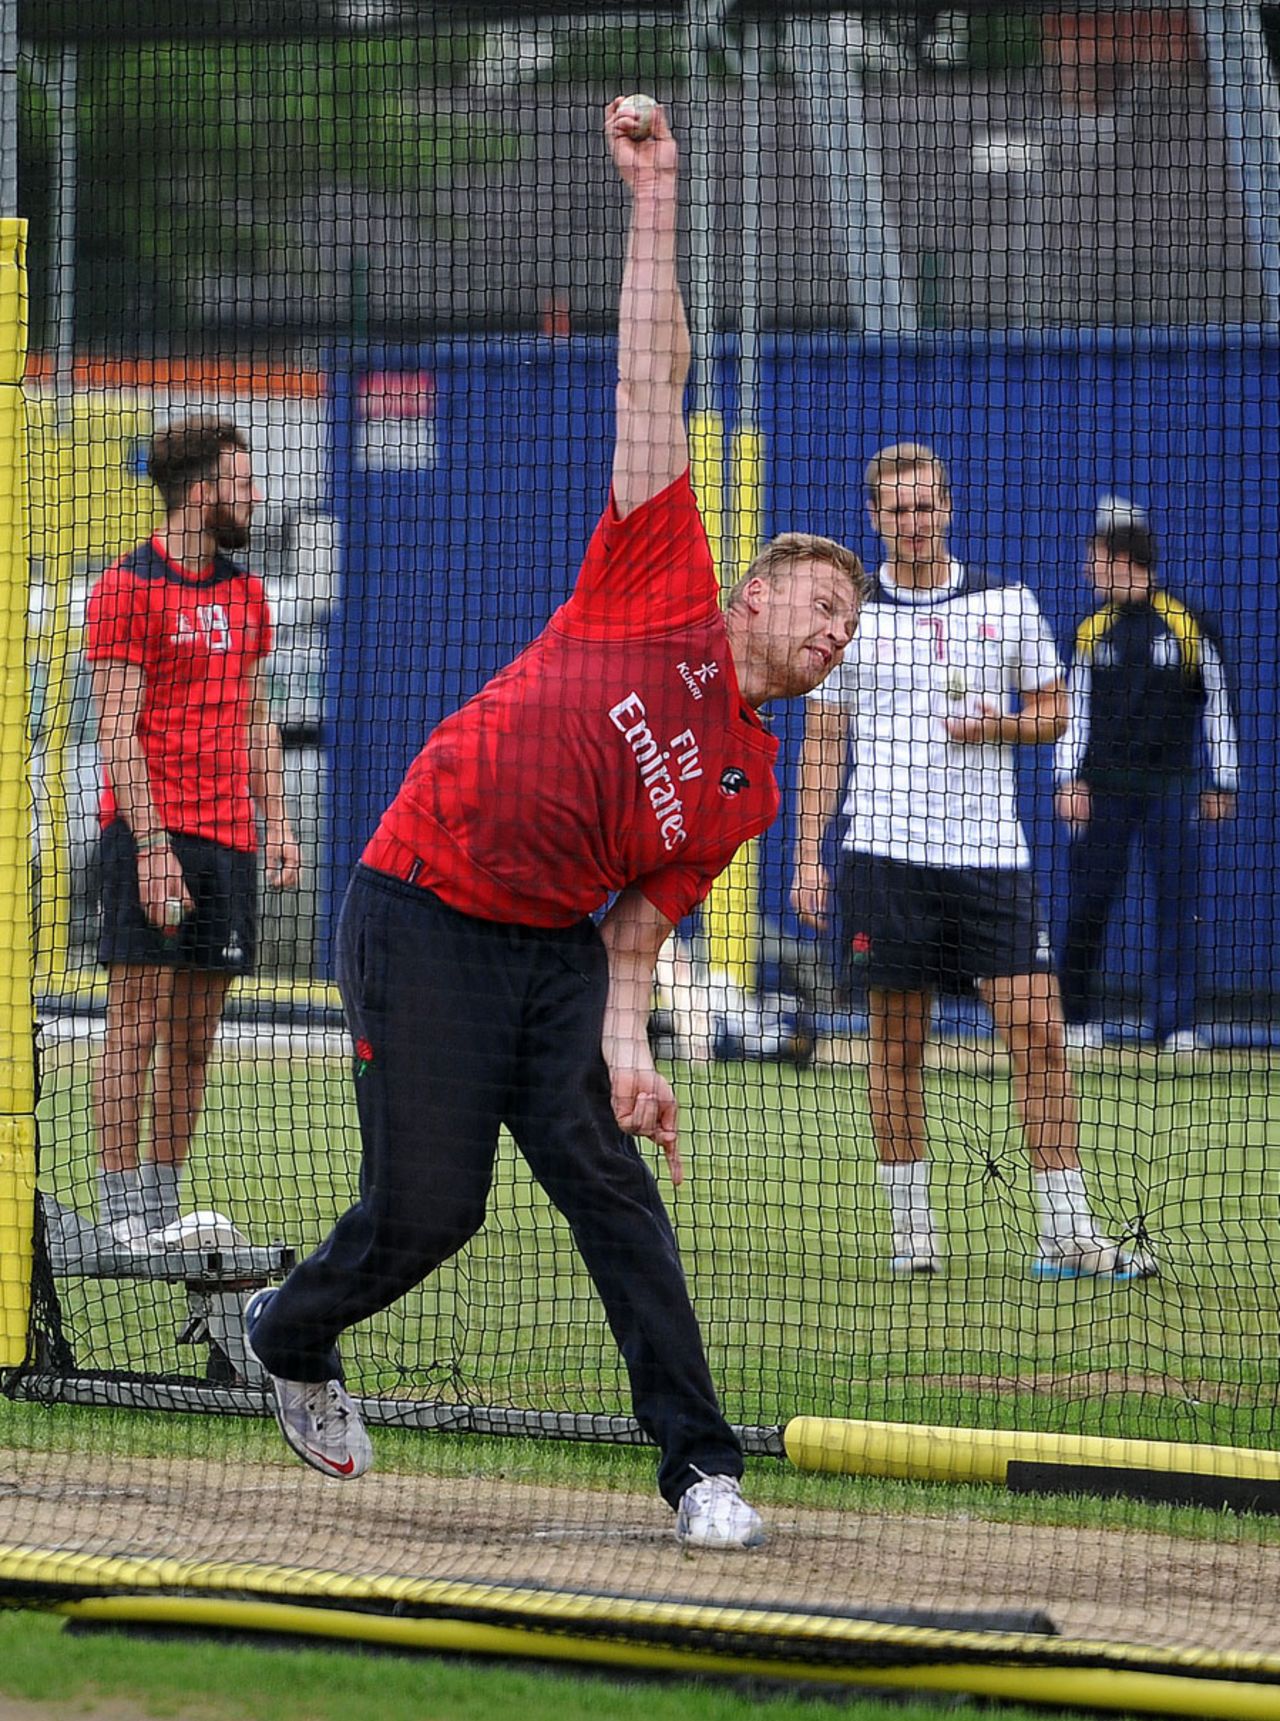 Andrew Flintoff was back in the nets at Old Trafford, Manchester, May 30, 2014